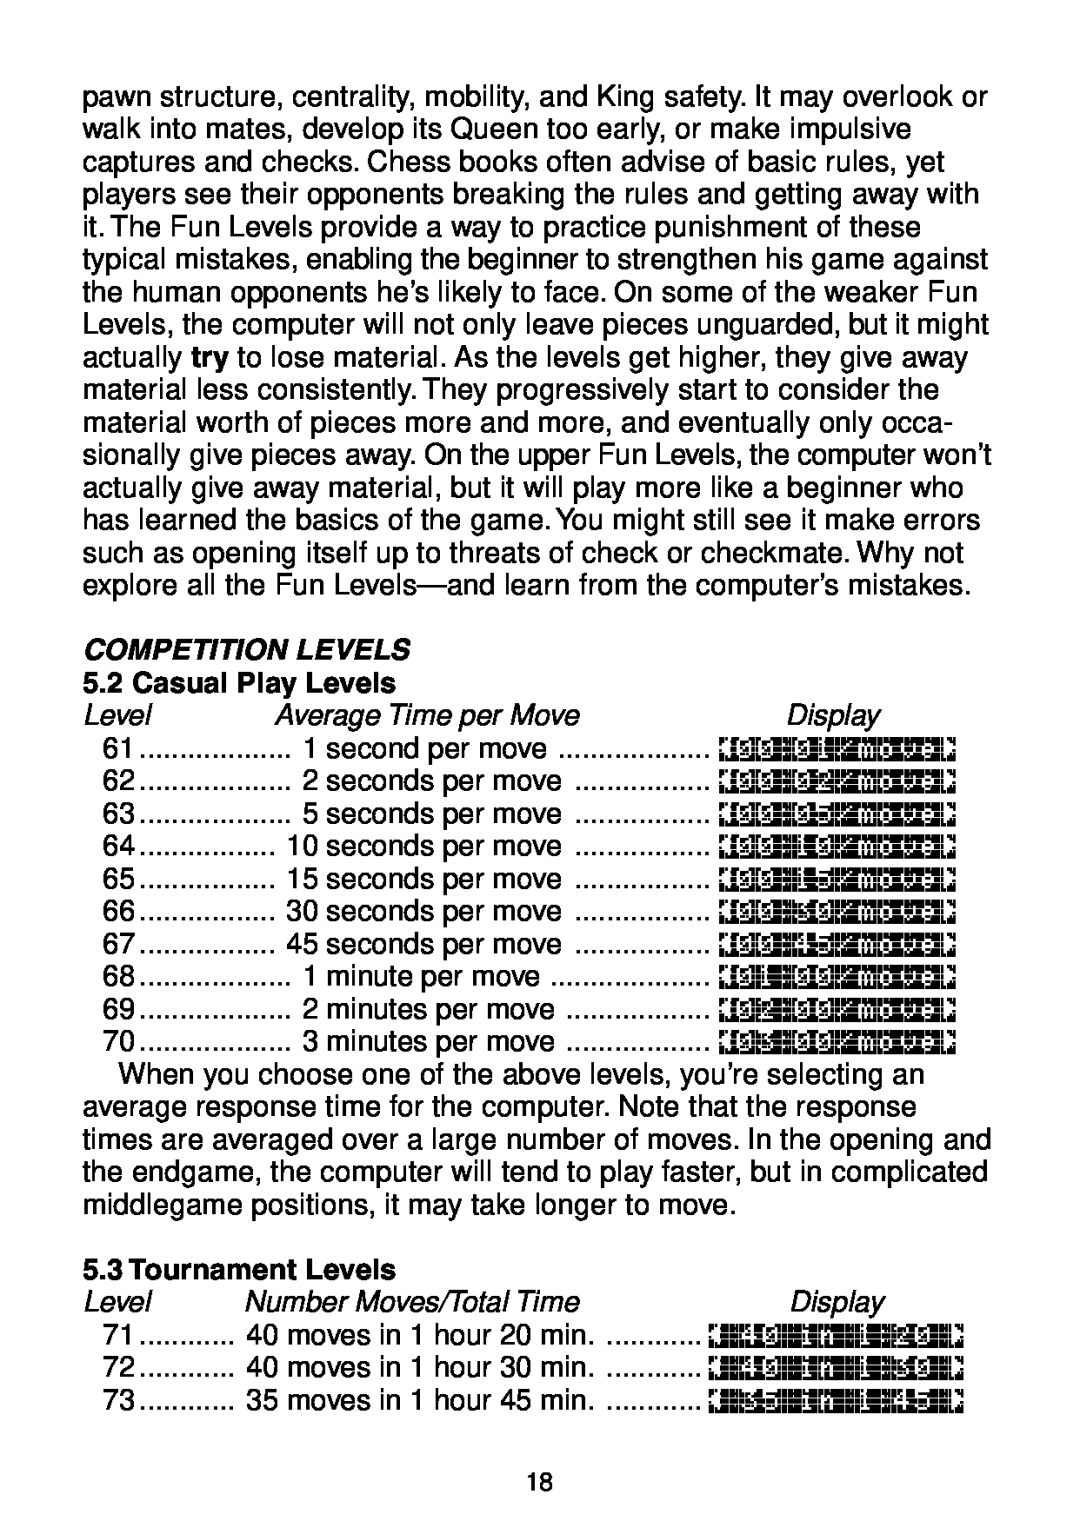 Saitek Maestro Travel Chess Computer Competition Levels, Casual Play Levels, Display, second per move, seconds per move 